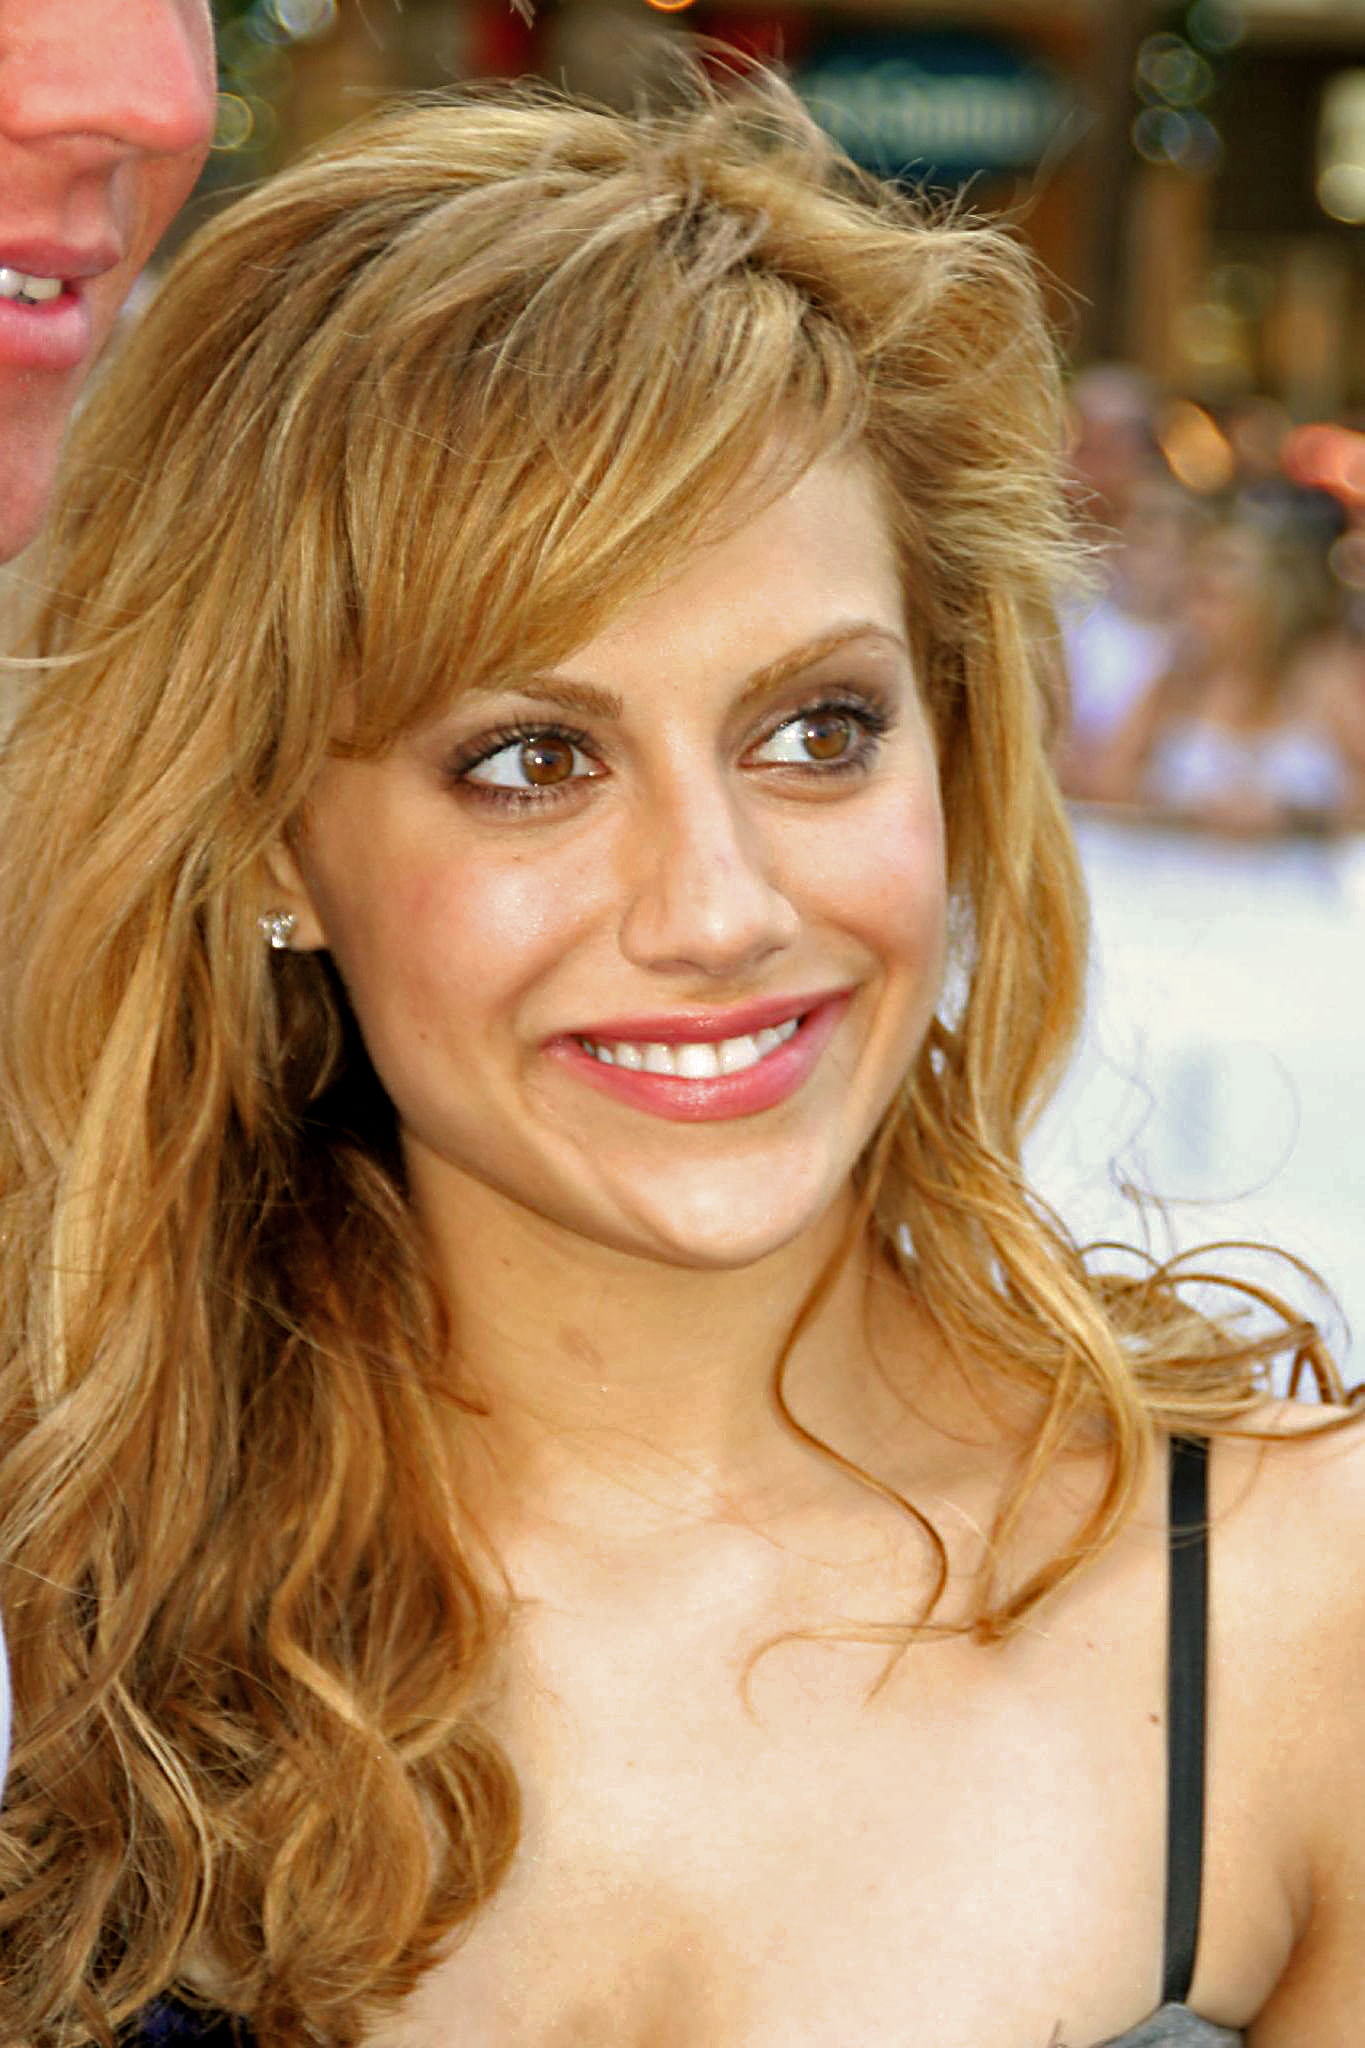 @brittanyMurphy profile image